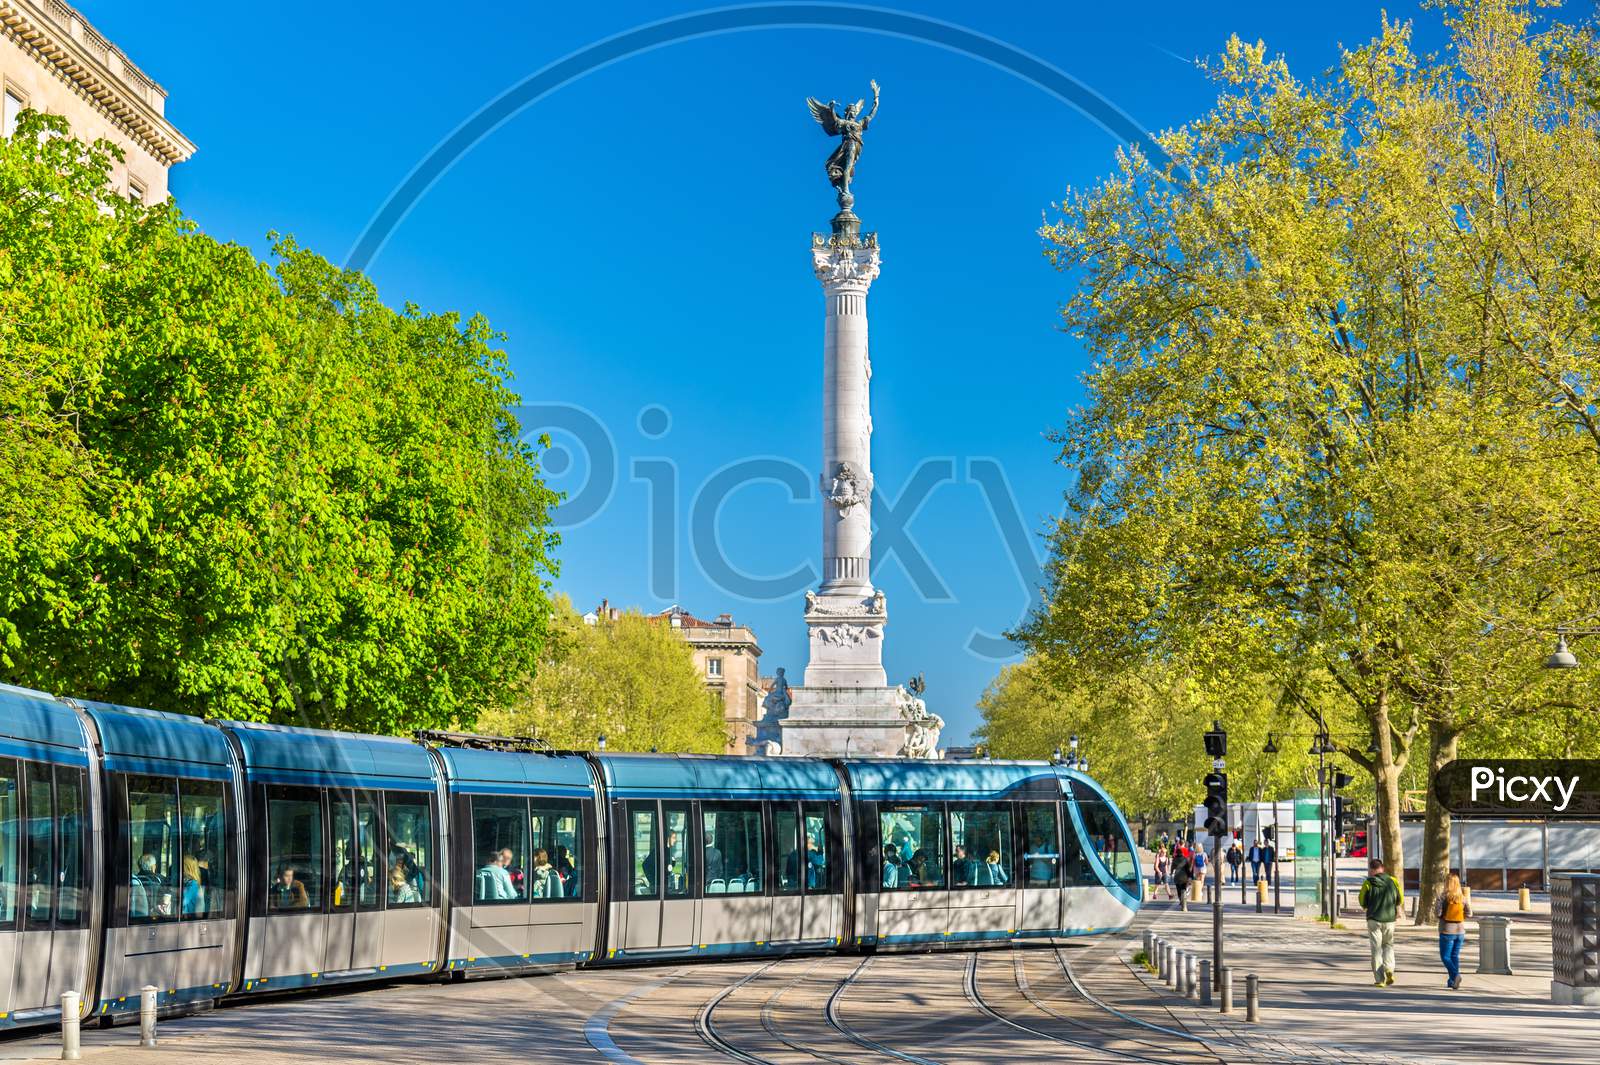 Tram Near The Monument Aux Girondins In Bordeaux, France